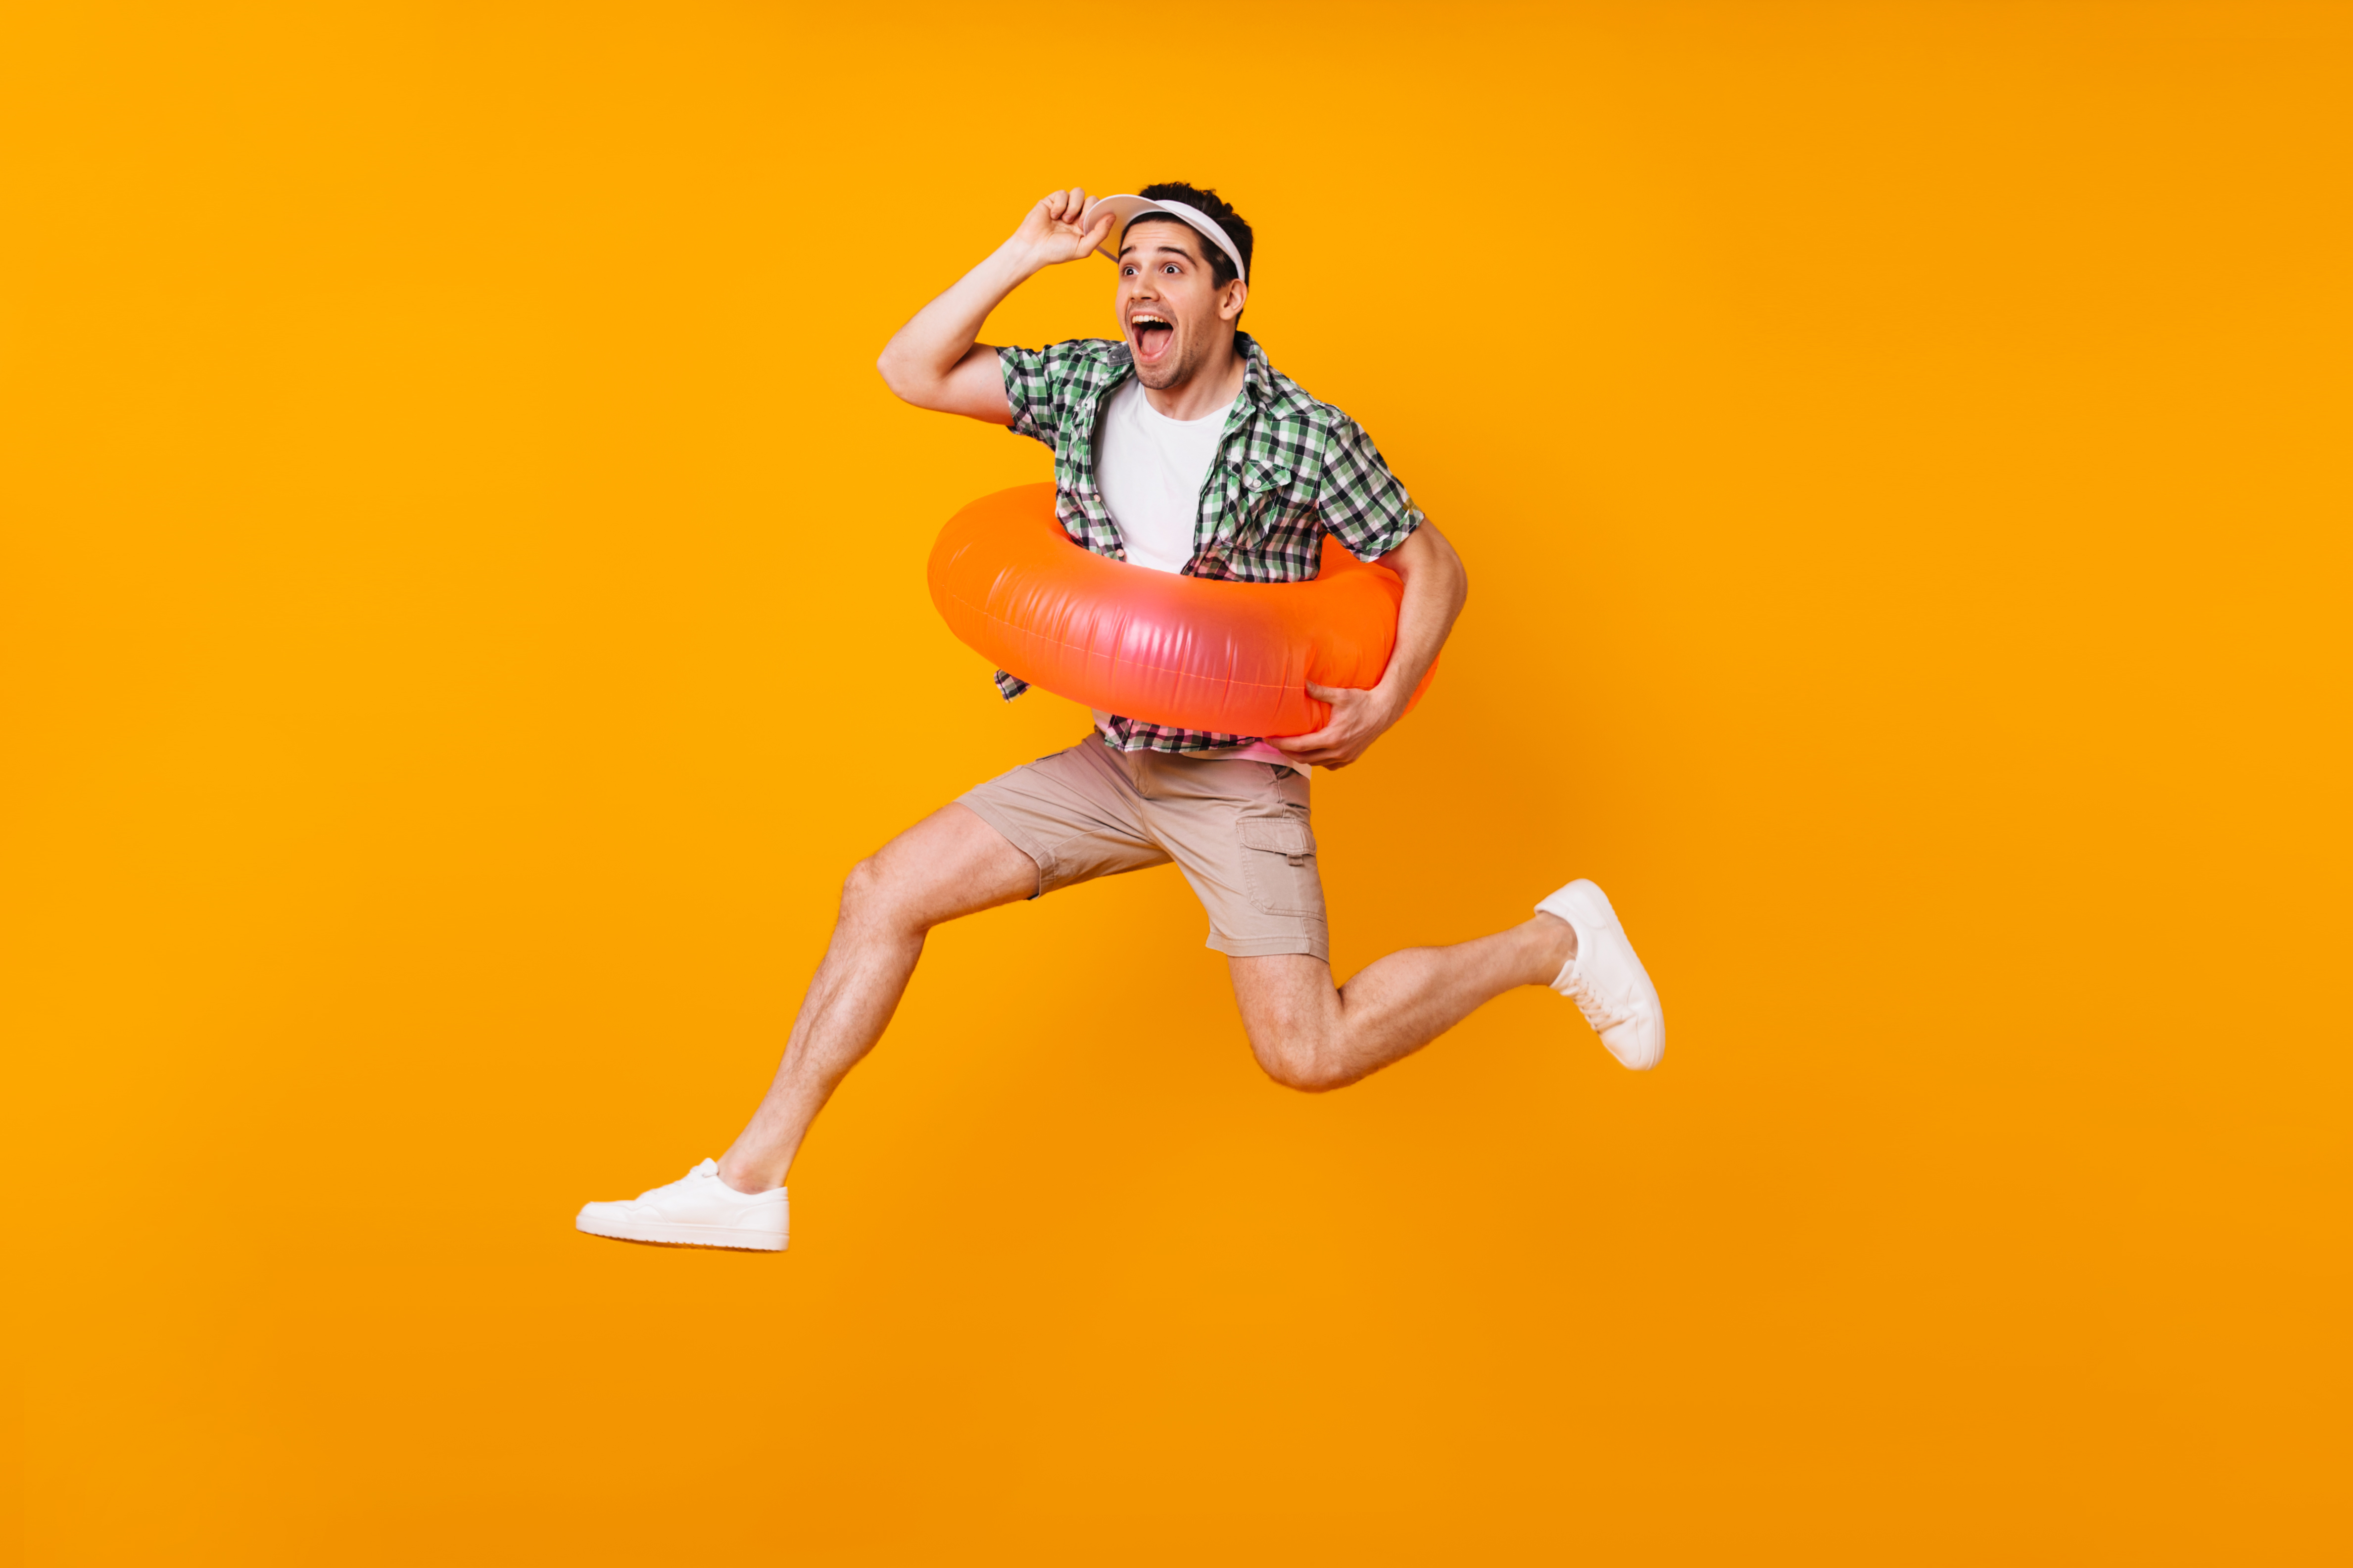 Emotional guy in high spirits jumps on orange background with inflatable circle and takes off his cap.